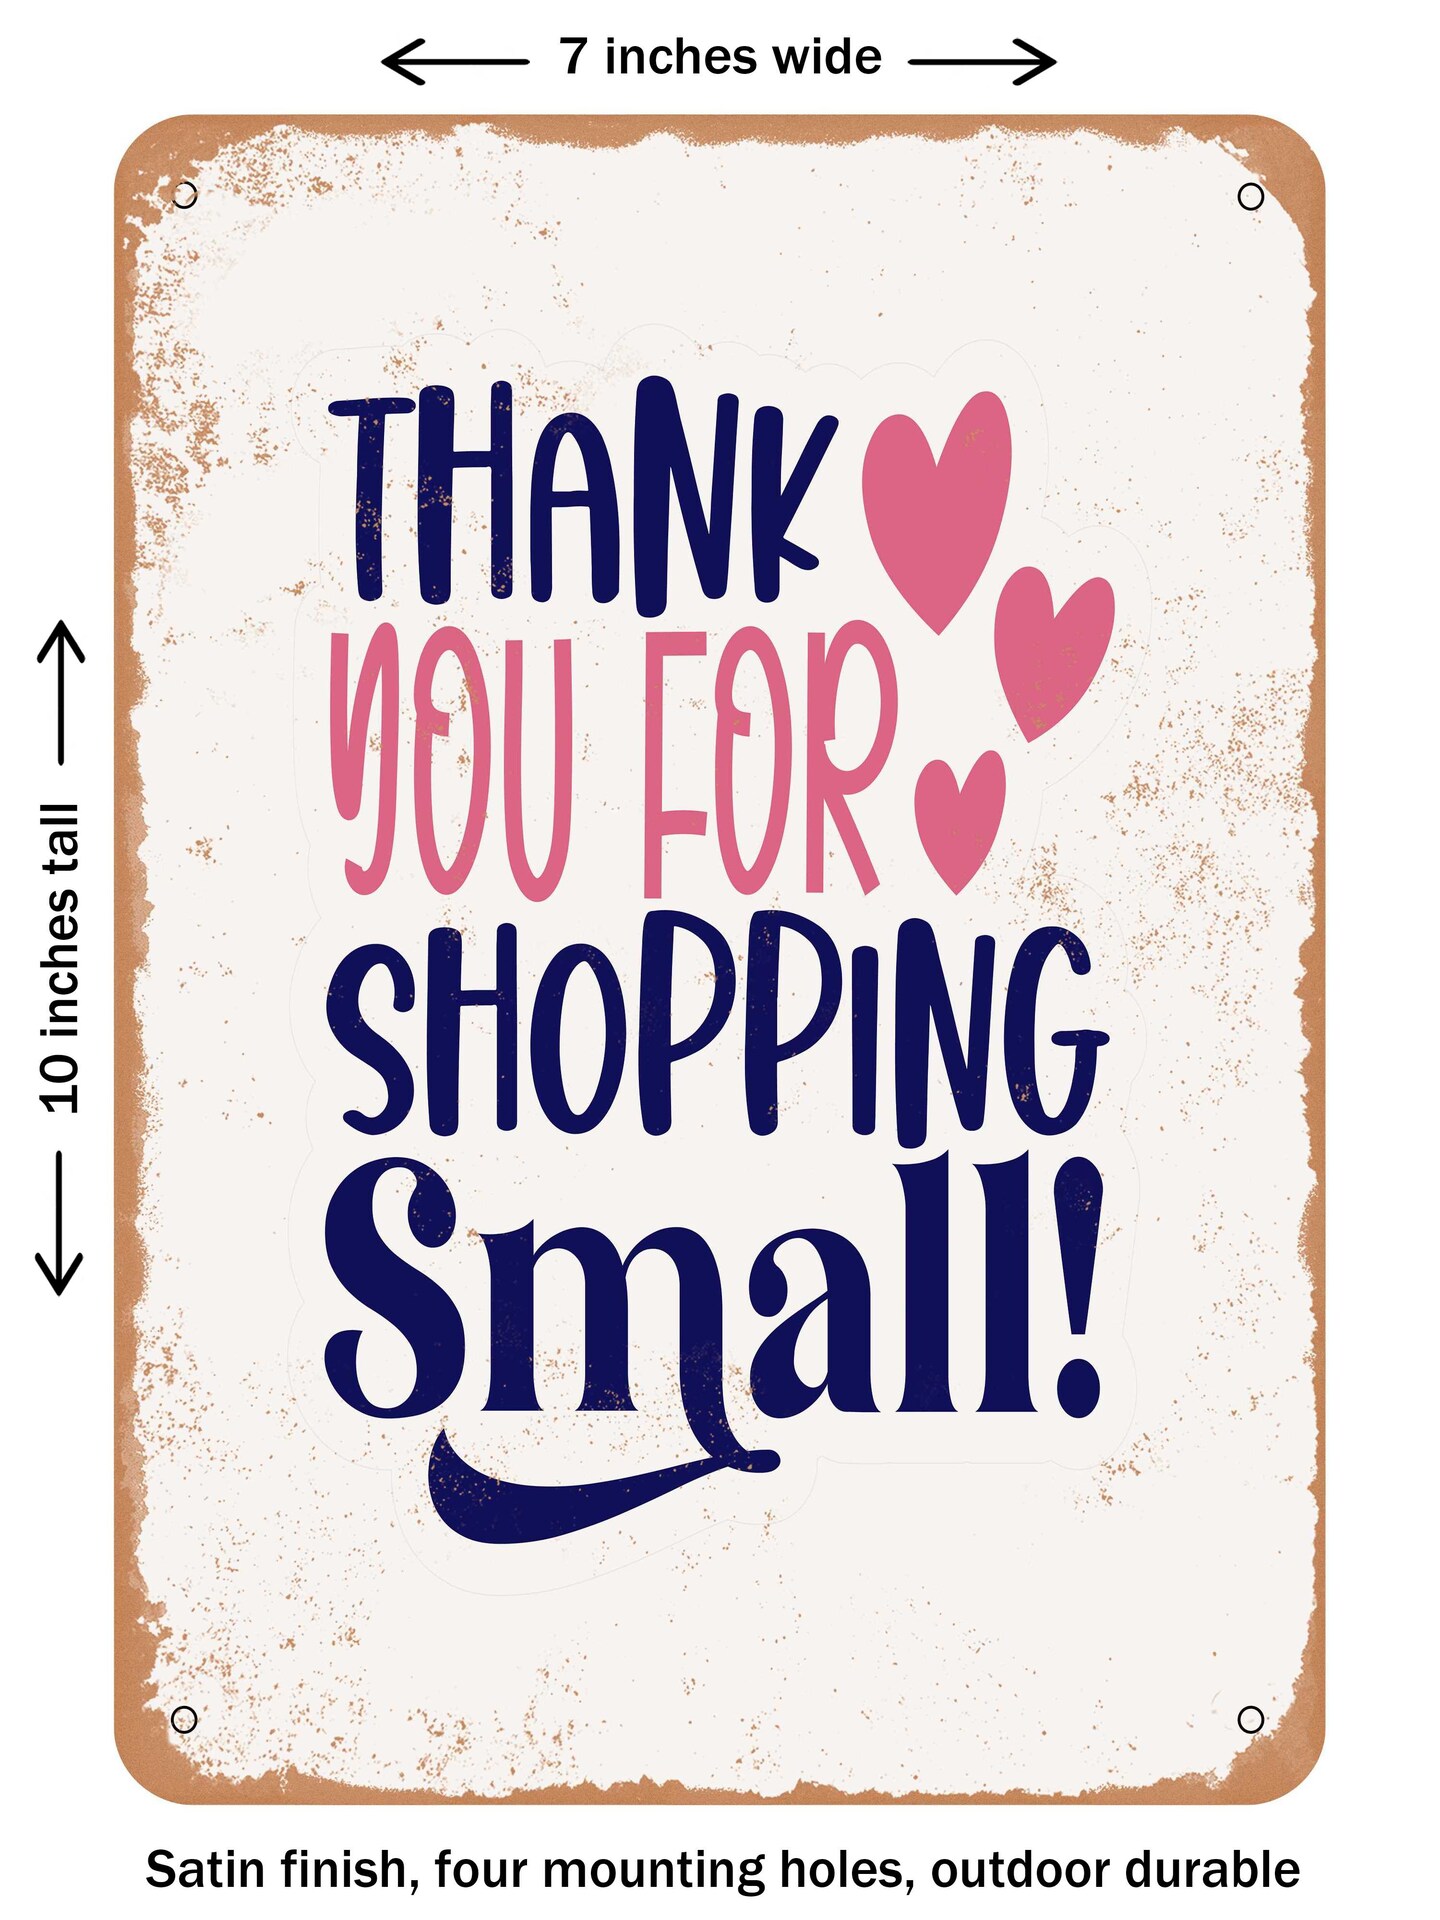 DECORATIVE METAL SIGN - Thank You For Shopping Small  - Vintage Rusty Look